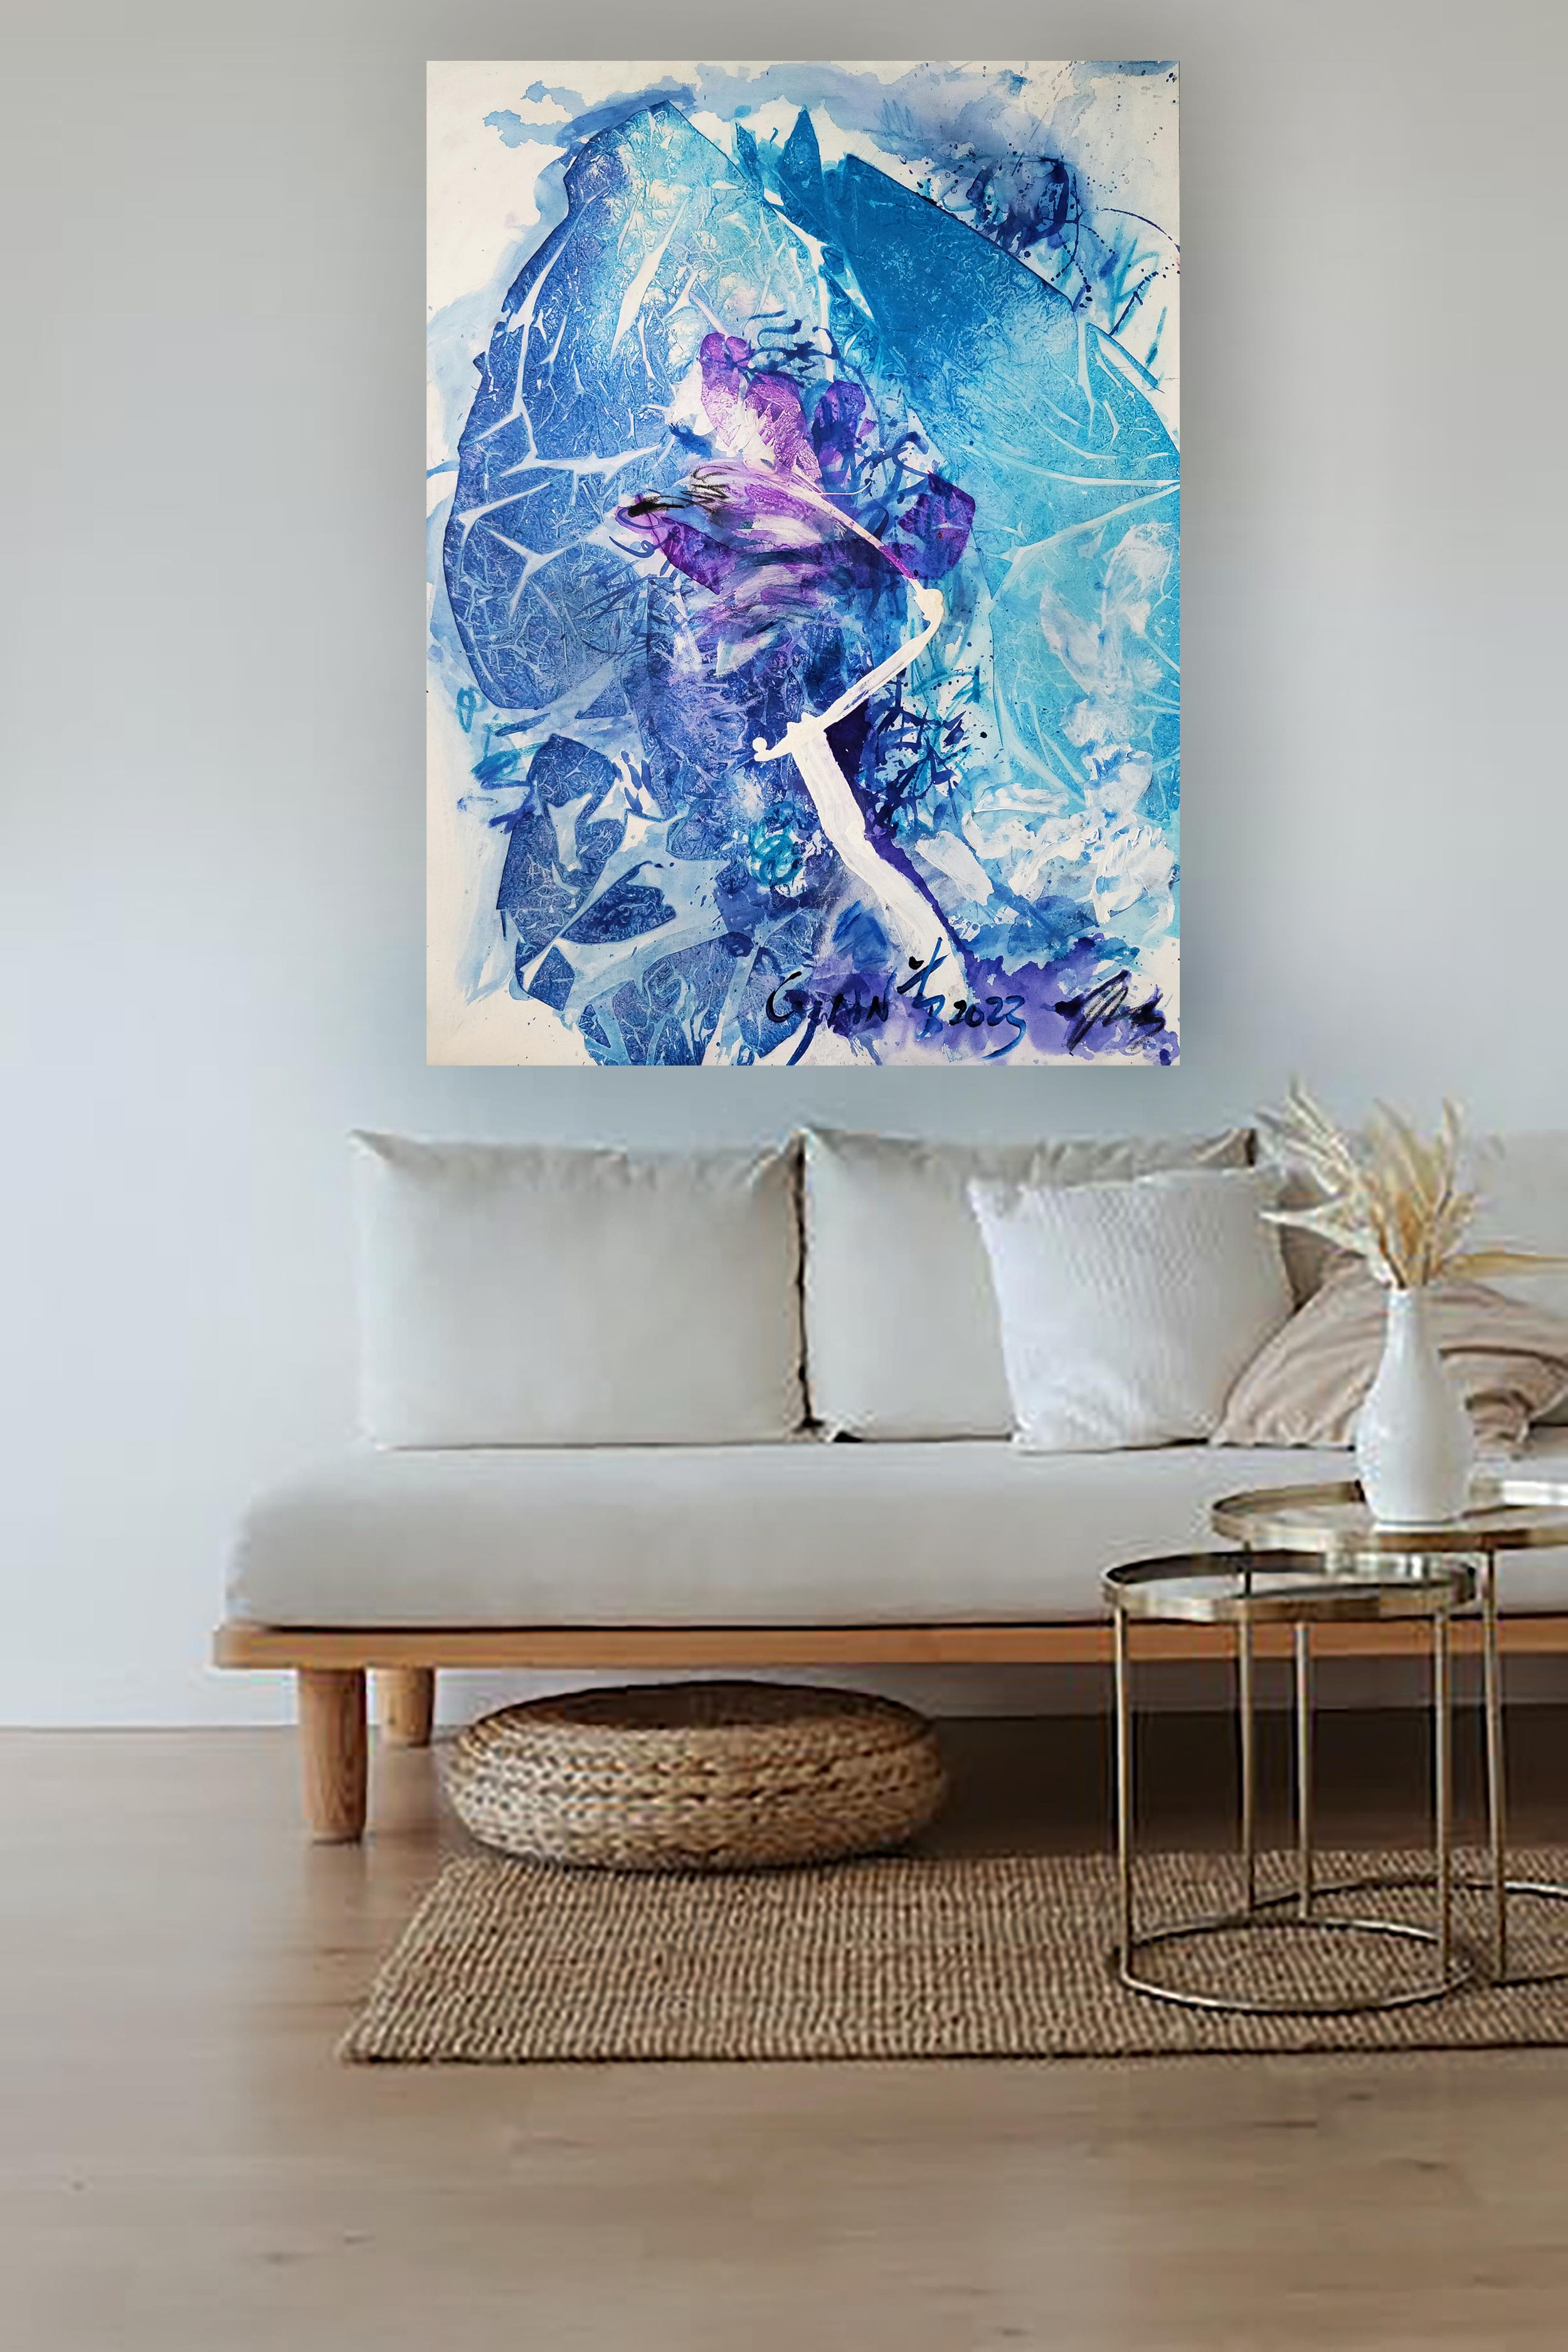 Solitary Blossom – Fresh, Lyrical, Expressive Abstract, Zen Calligraphy - Abstract Expressionist Painting by Cymn Wong 